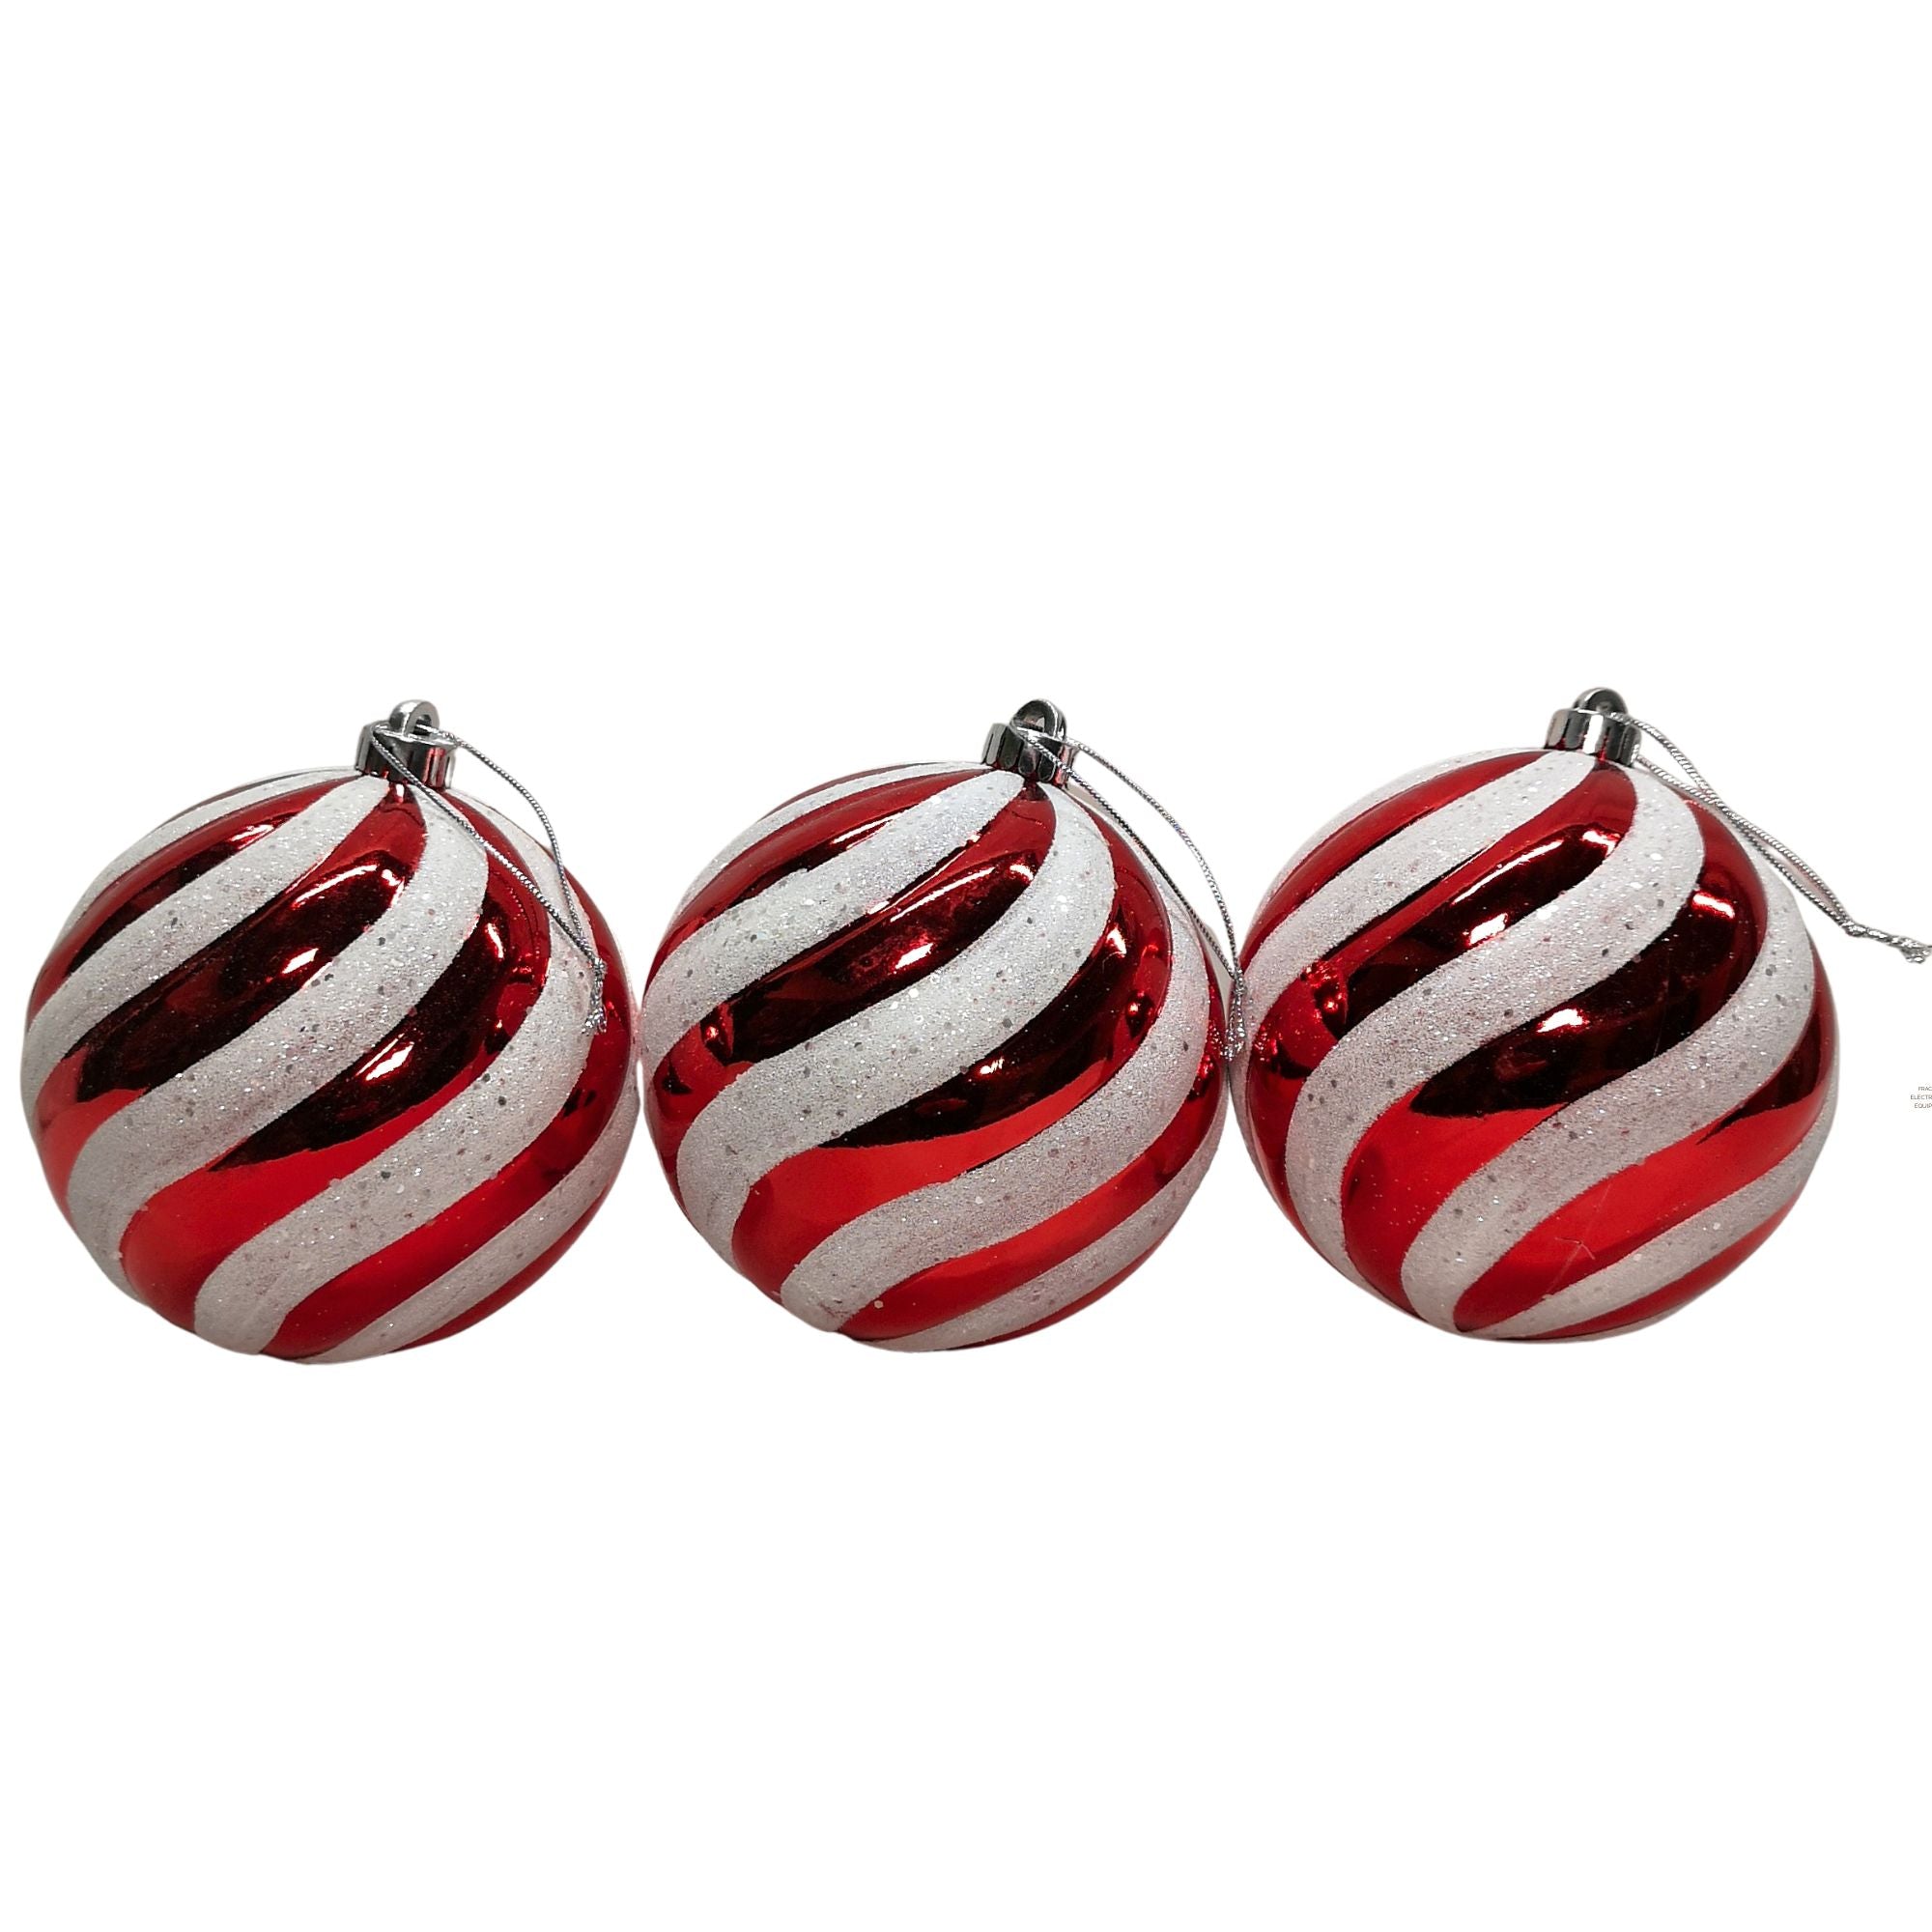 Pack of 3 Large Red & White Candy Cane Shatterproof Christmas Baubles Decorations